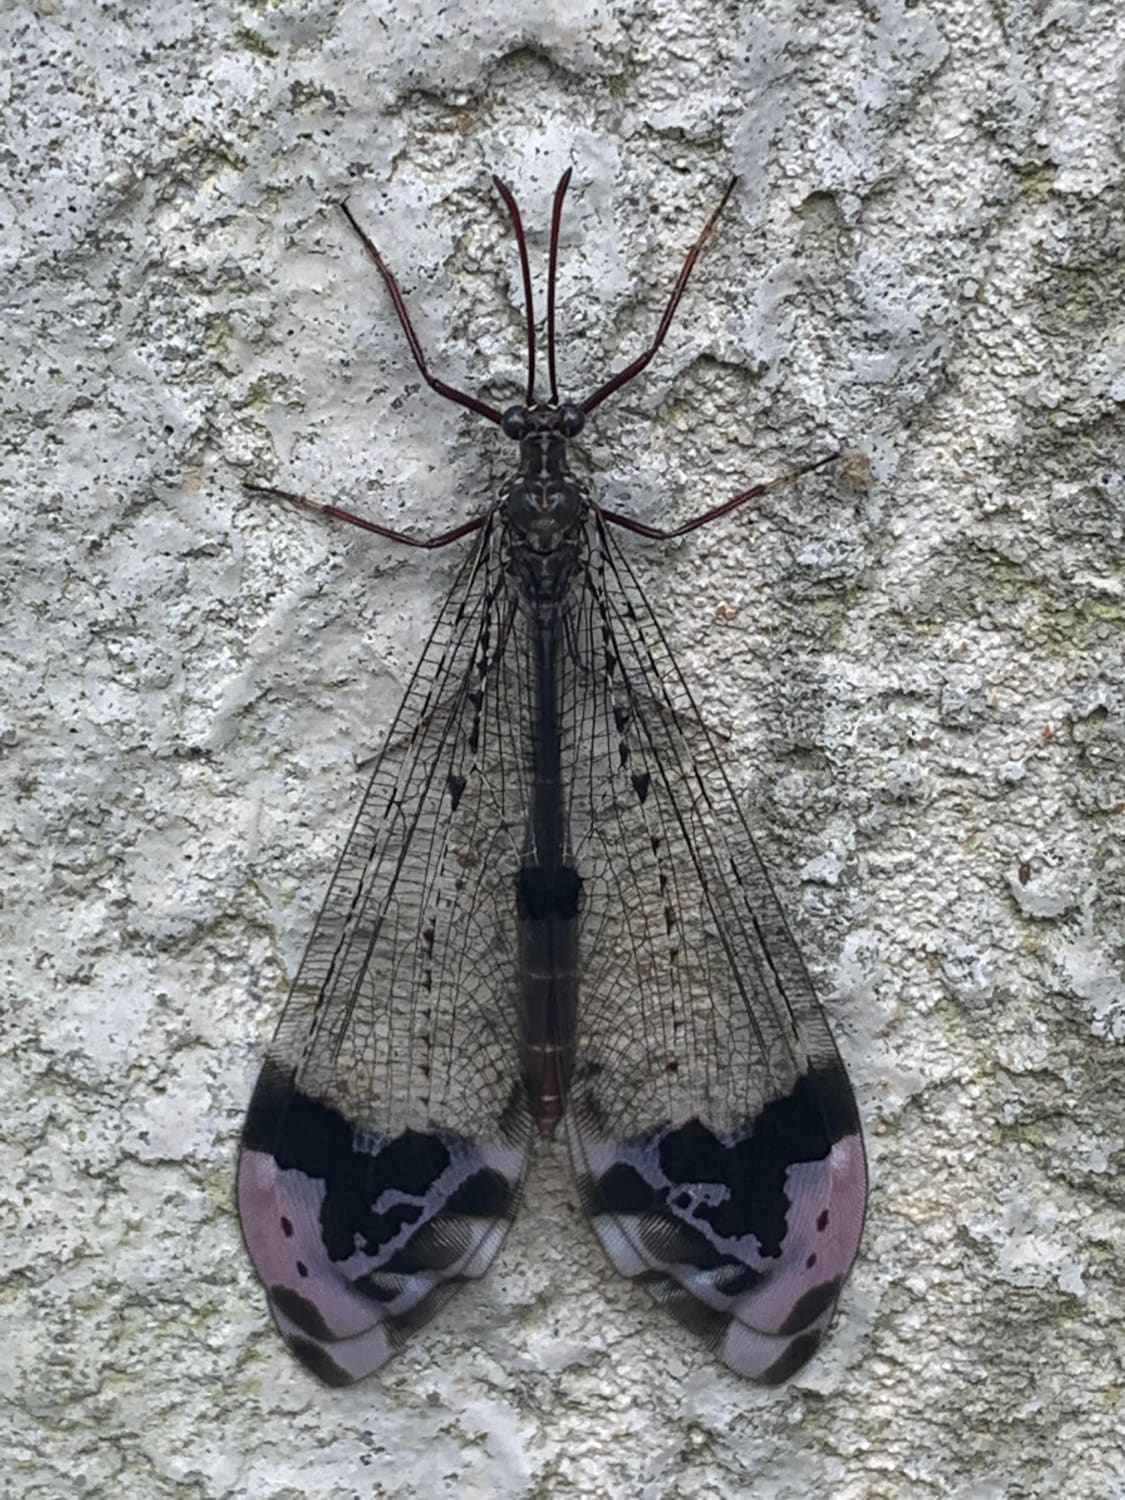 Really cool Lacewing I found